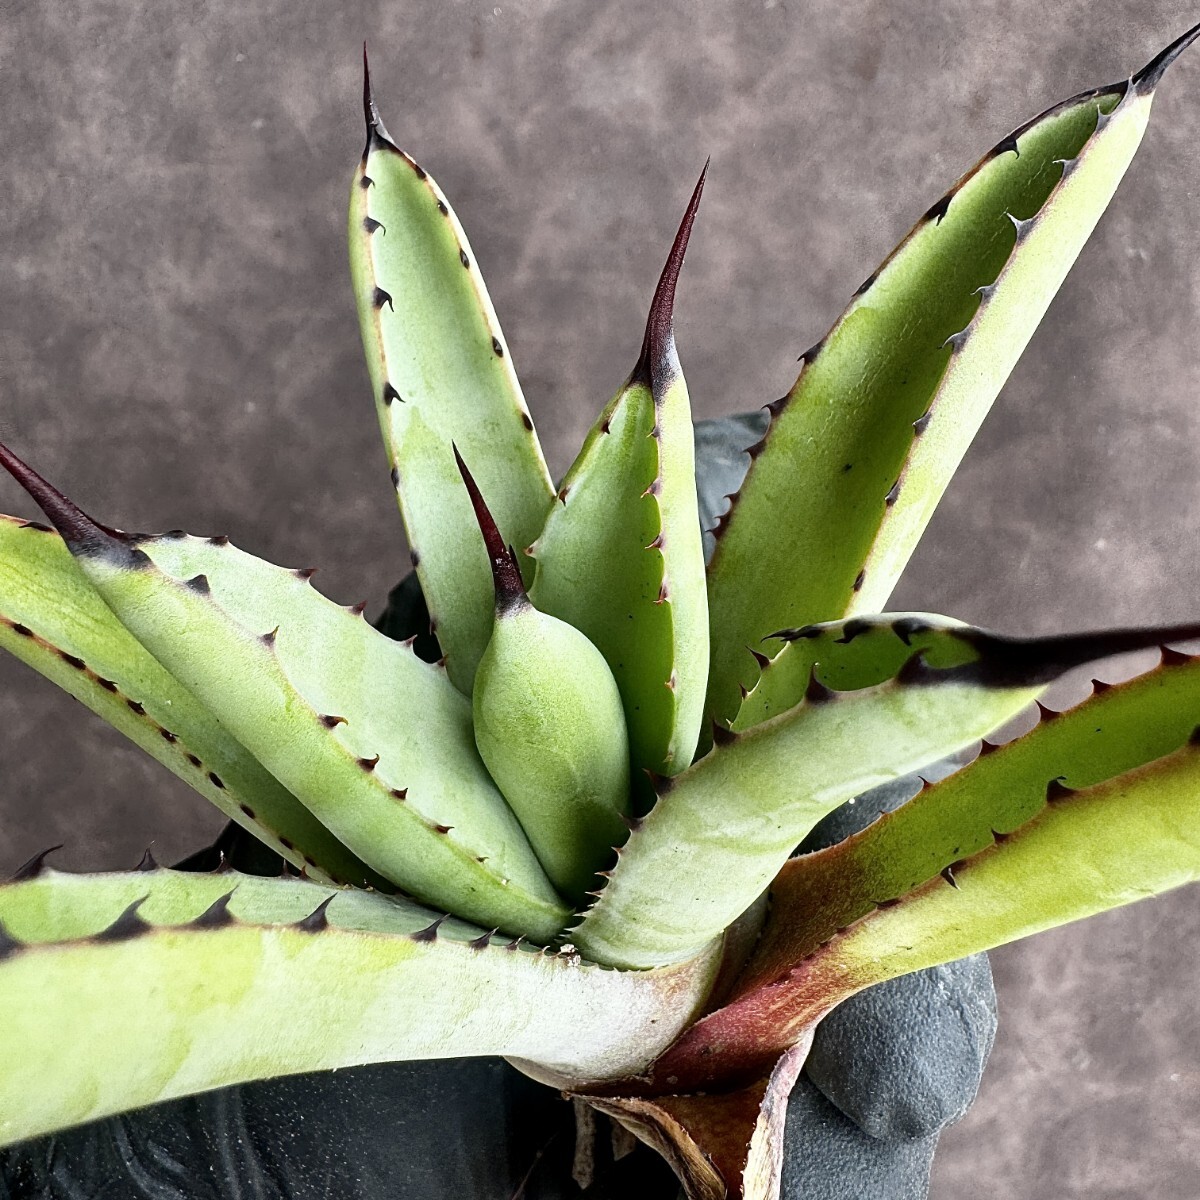 [Lj_plants]H73 agave macro a can saAgave macroacantha finest quality large . stock 1 stock 